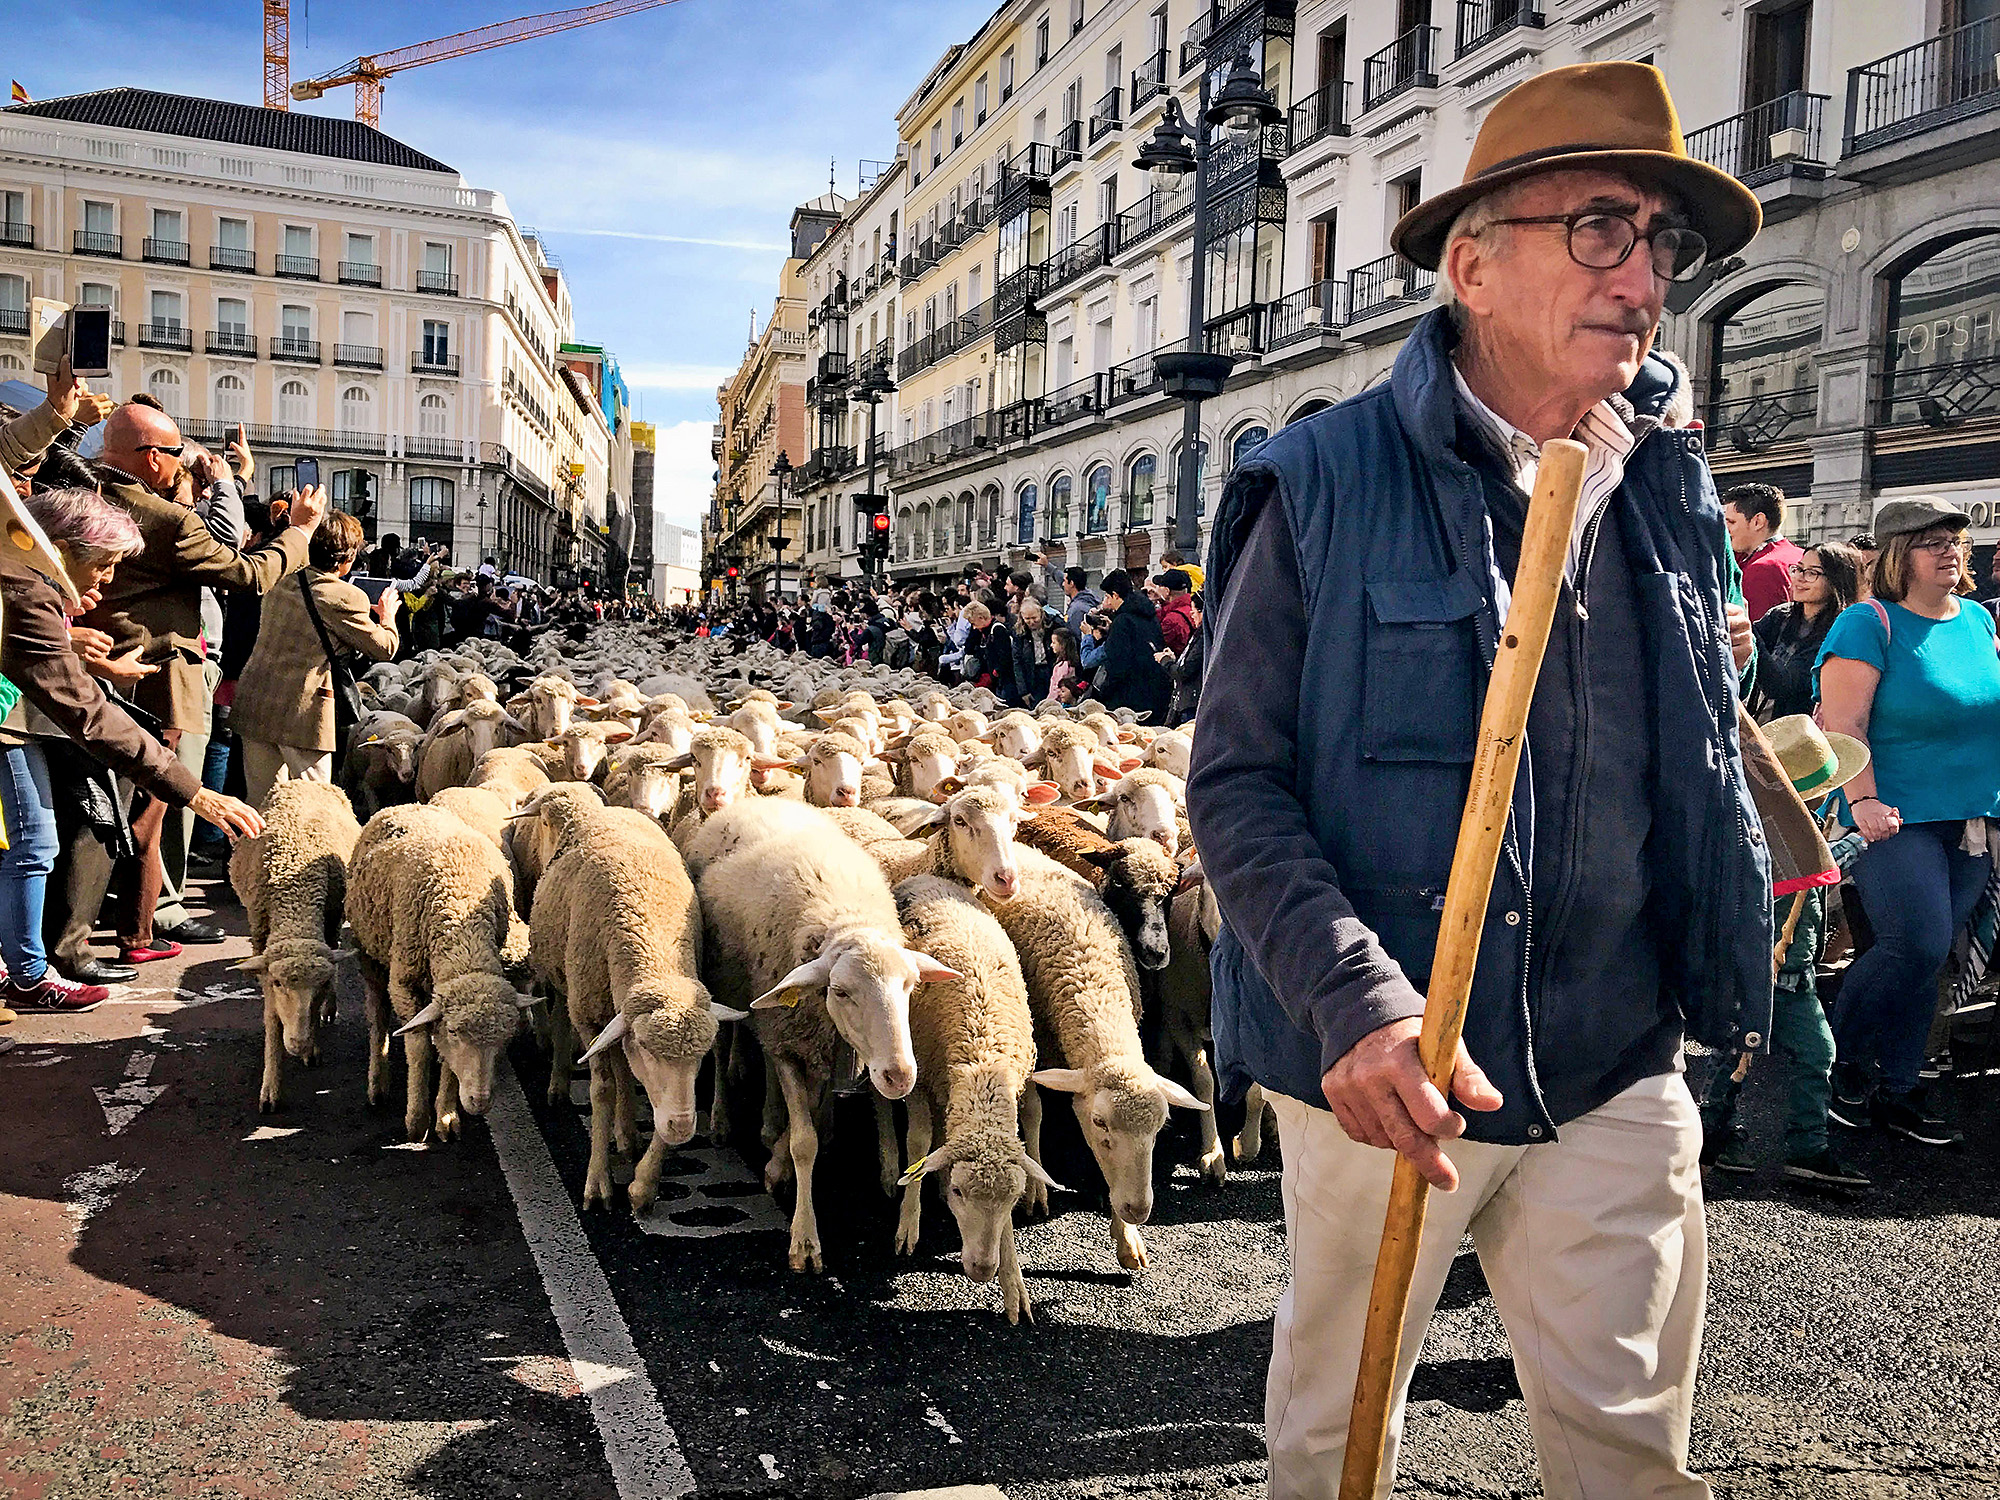 shepherd and his sheep move through streets of Madrid while tourists snap photos